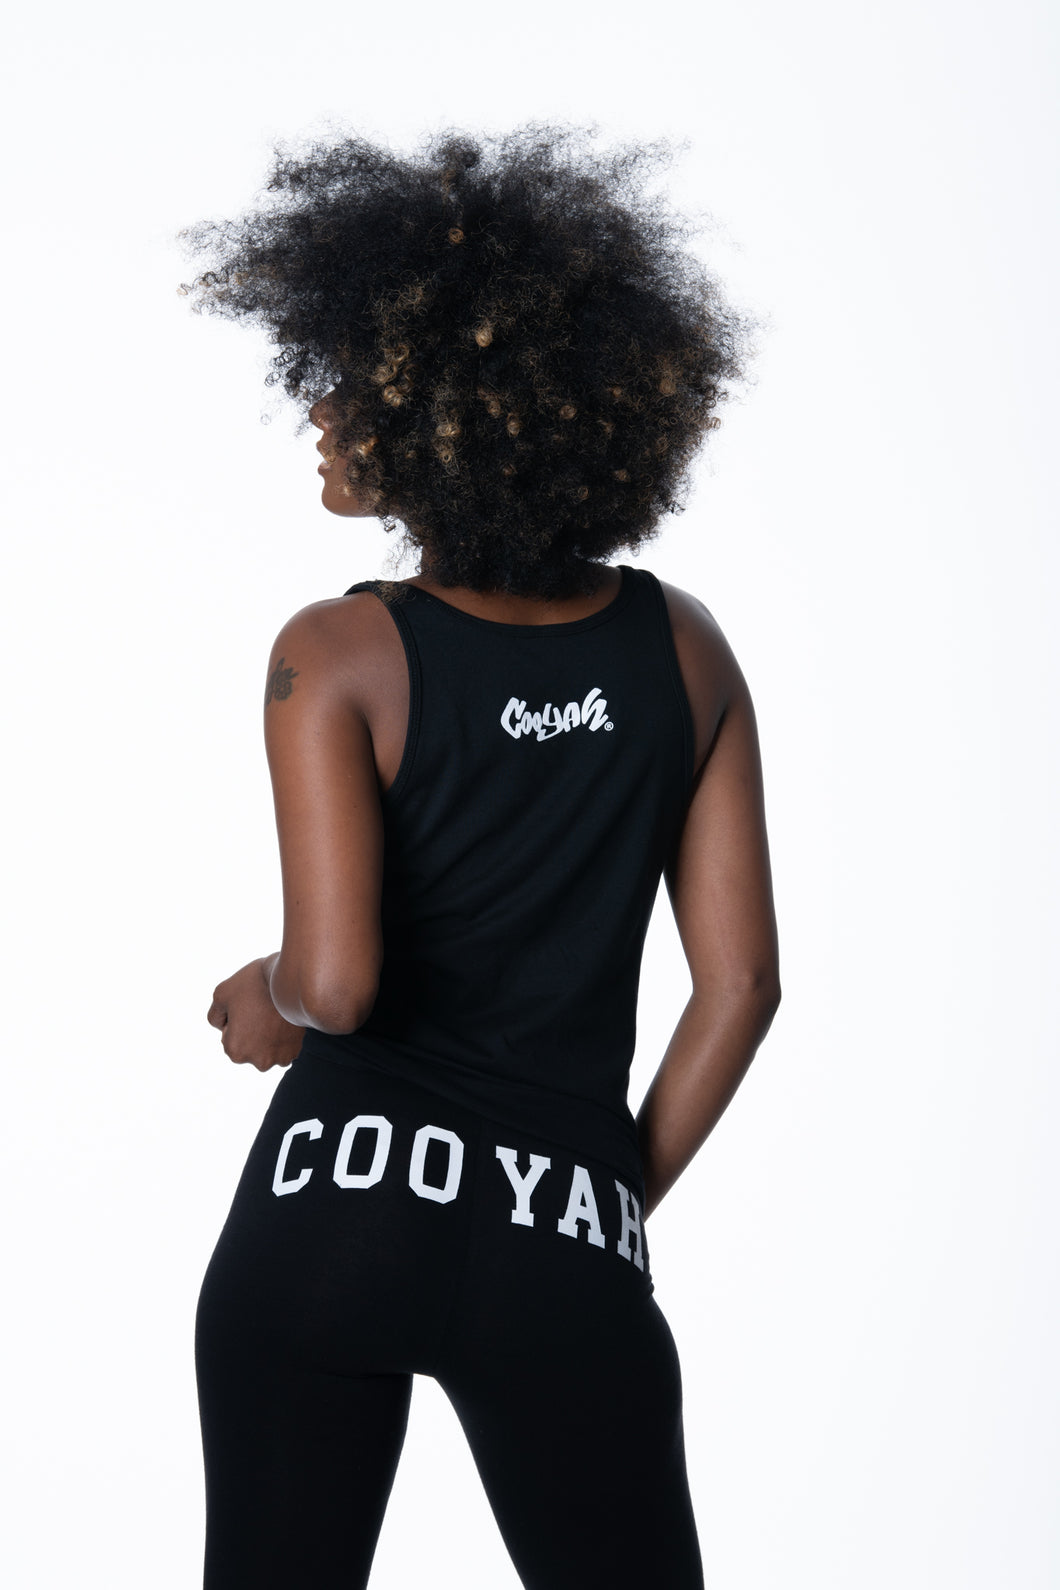 Cooyah Jamaica Women's black leggings with screen pirnted graphic, Athleisure, Jamaican Street Dance Wear clothing Dancehall Style, IRIE -